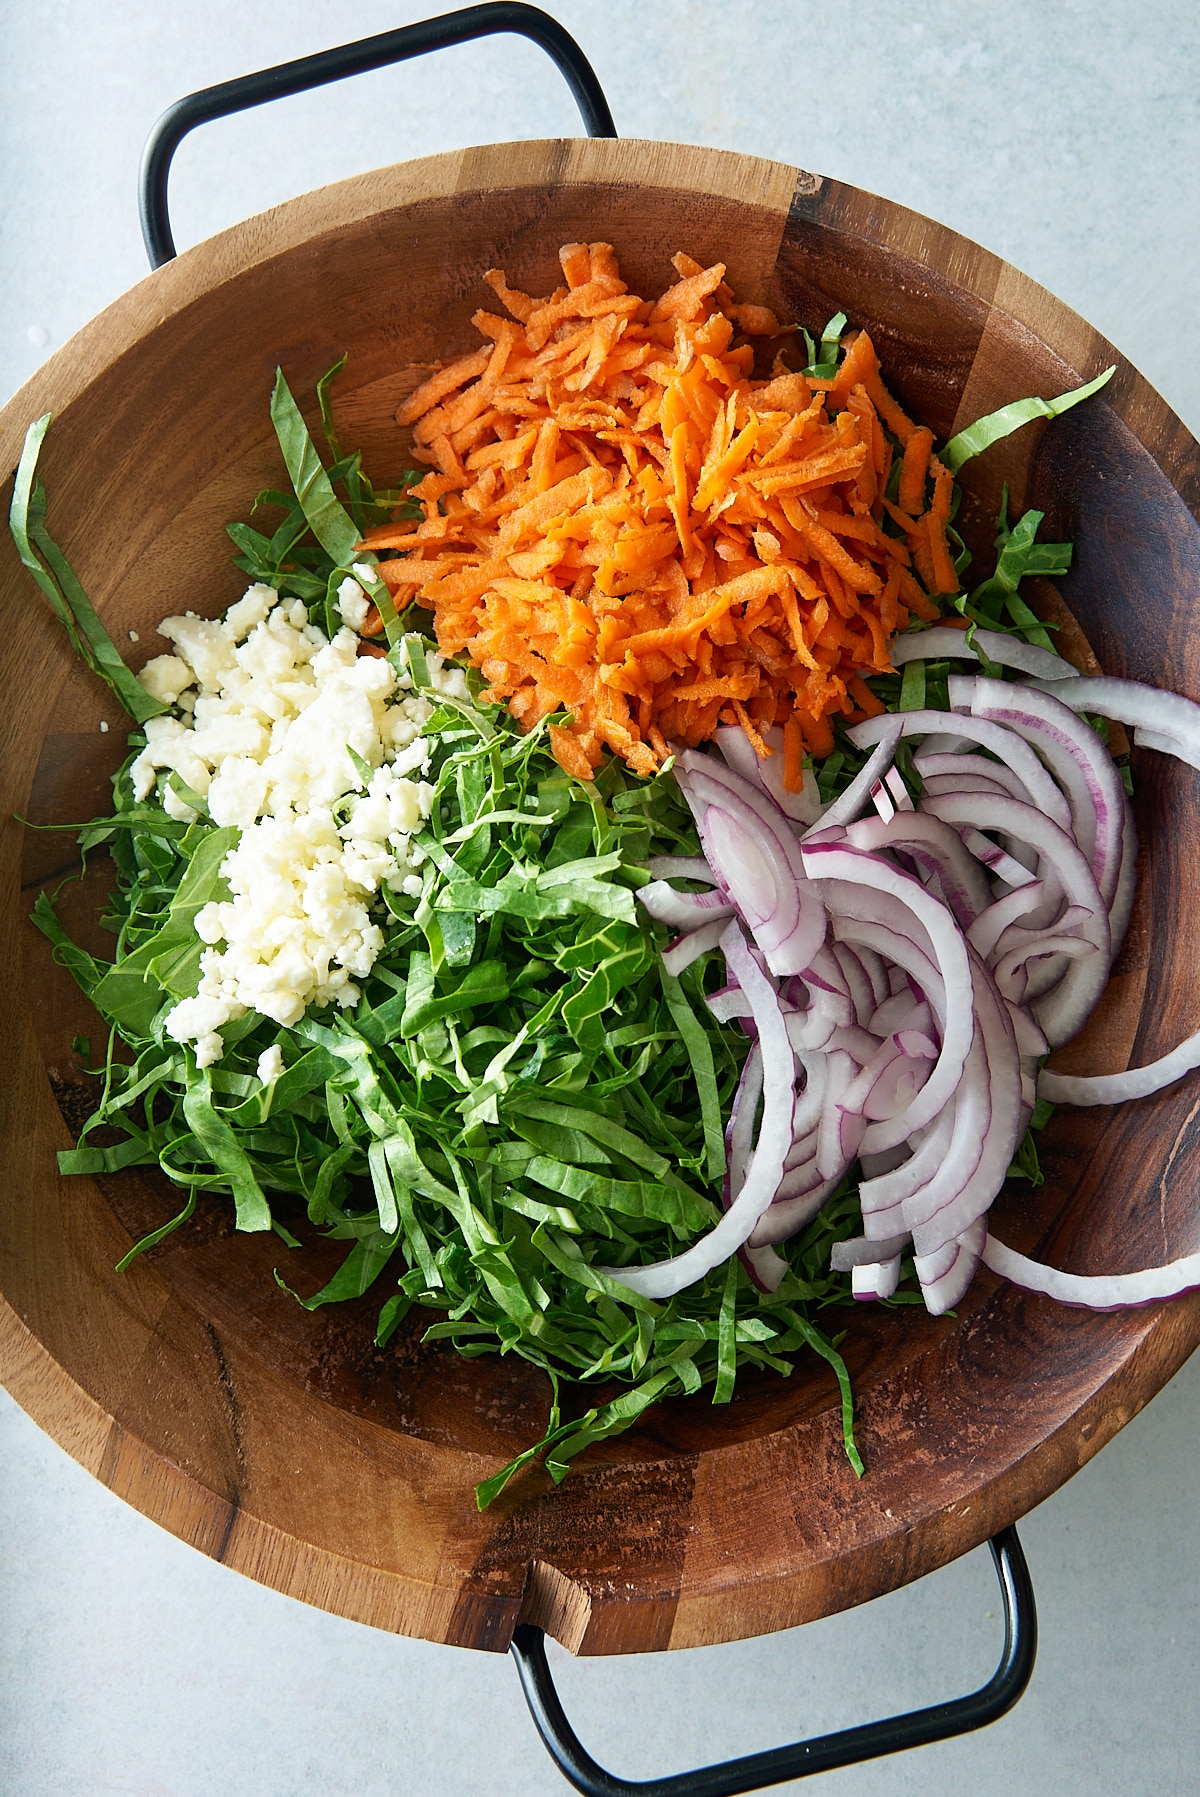 A wooden salad bowl filled with sliced salad vegetables, including collard greens, carrots, red onion, and some crumbled feta cheese.